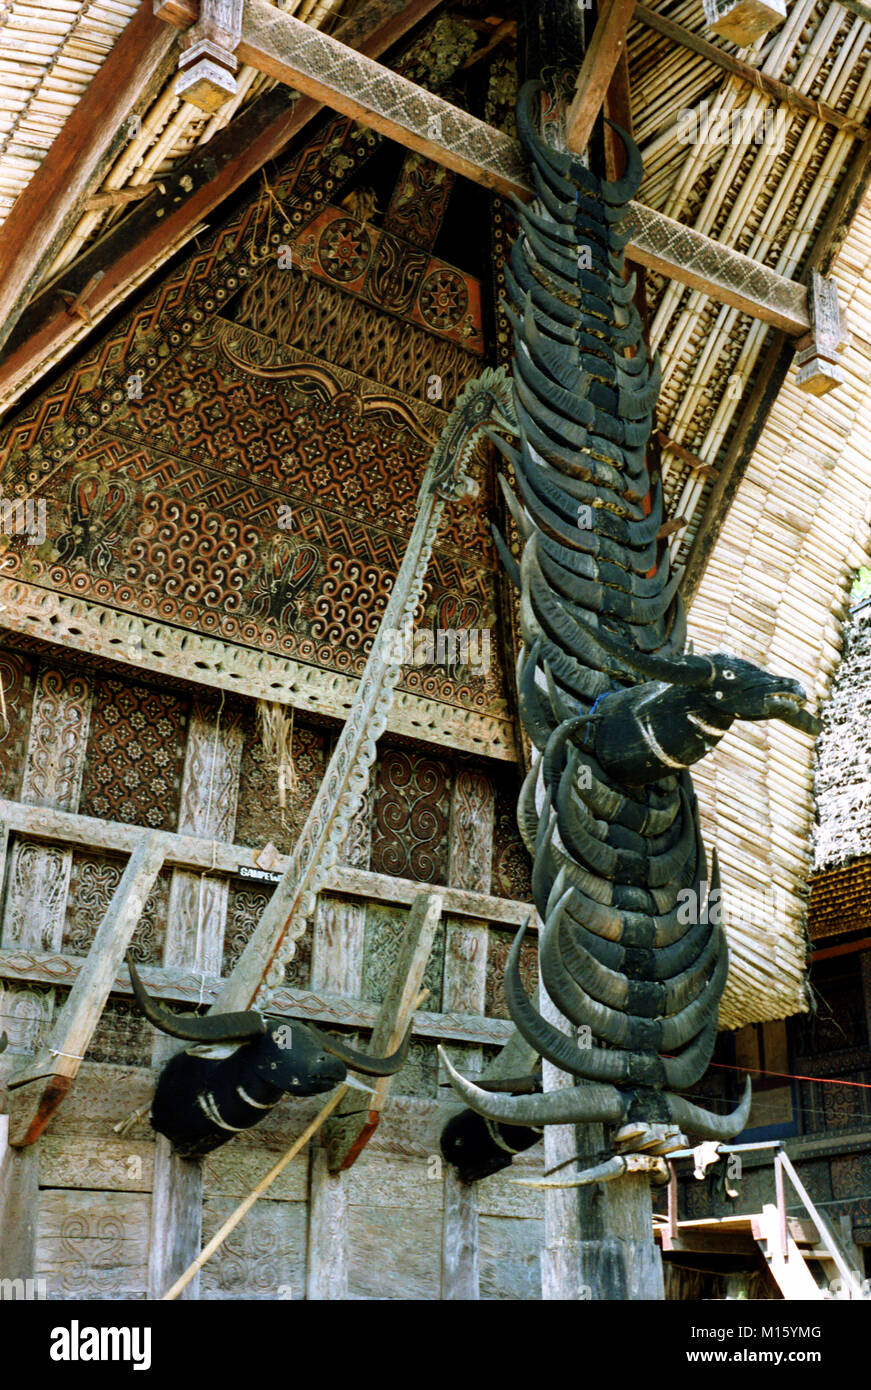 Buffalo horns decorate the eaves of a tongkonan or traditional Toraja house, South Sulawesi, eastern Indonesia. 1988 archival image Stock Photo